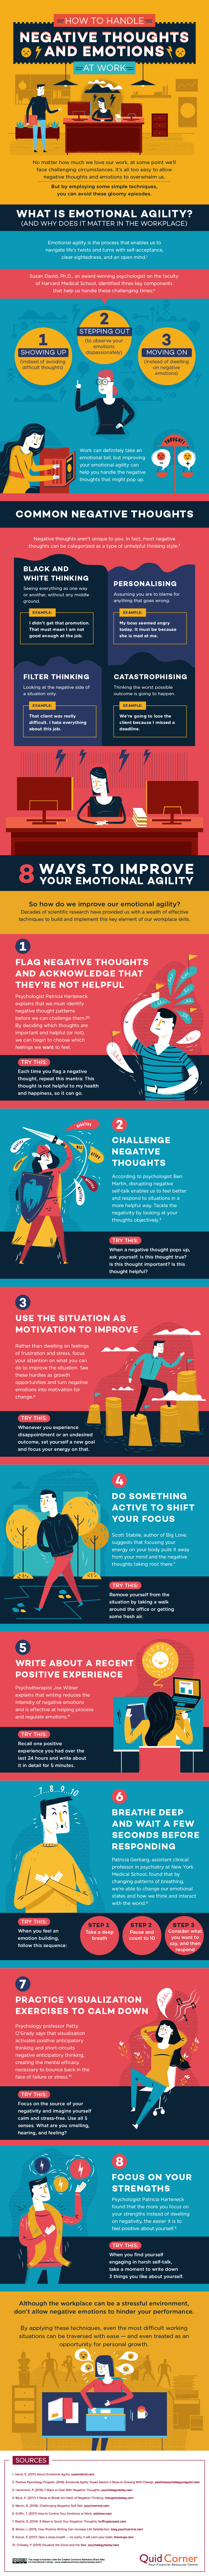 [Infographic] How To Stop Unhappy Thoughts Affecting You At Work